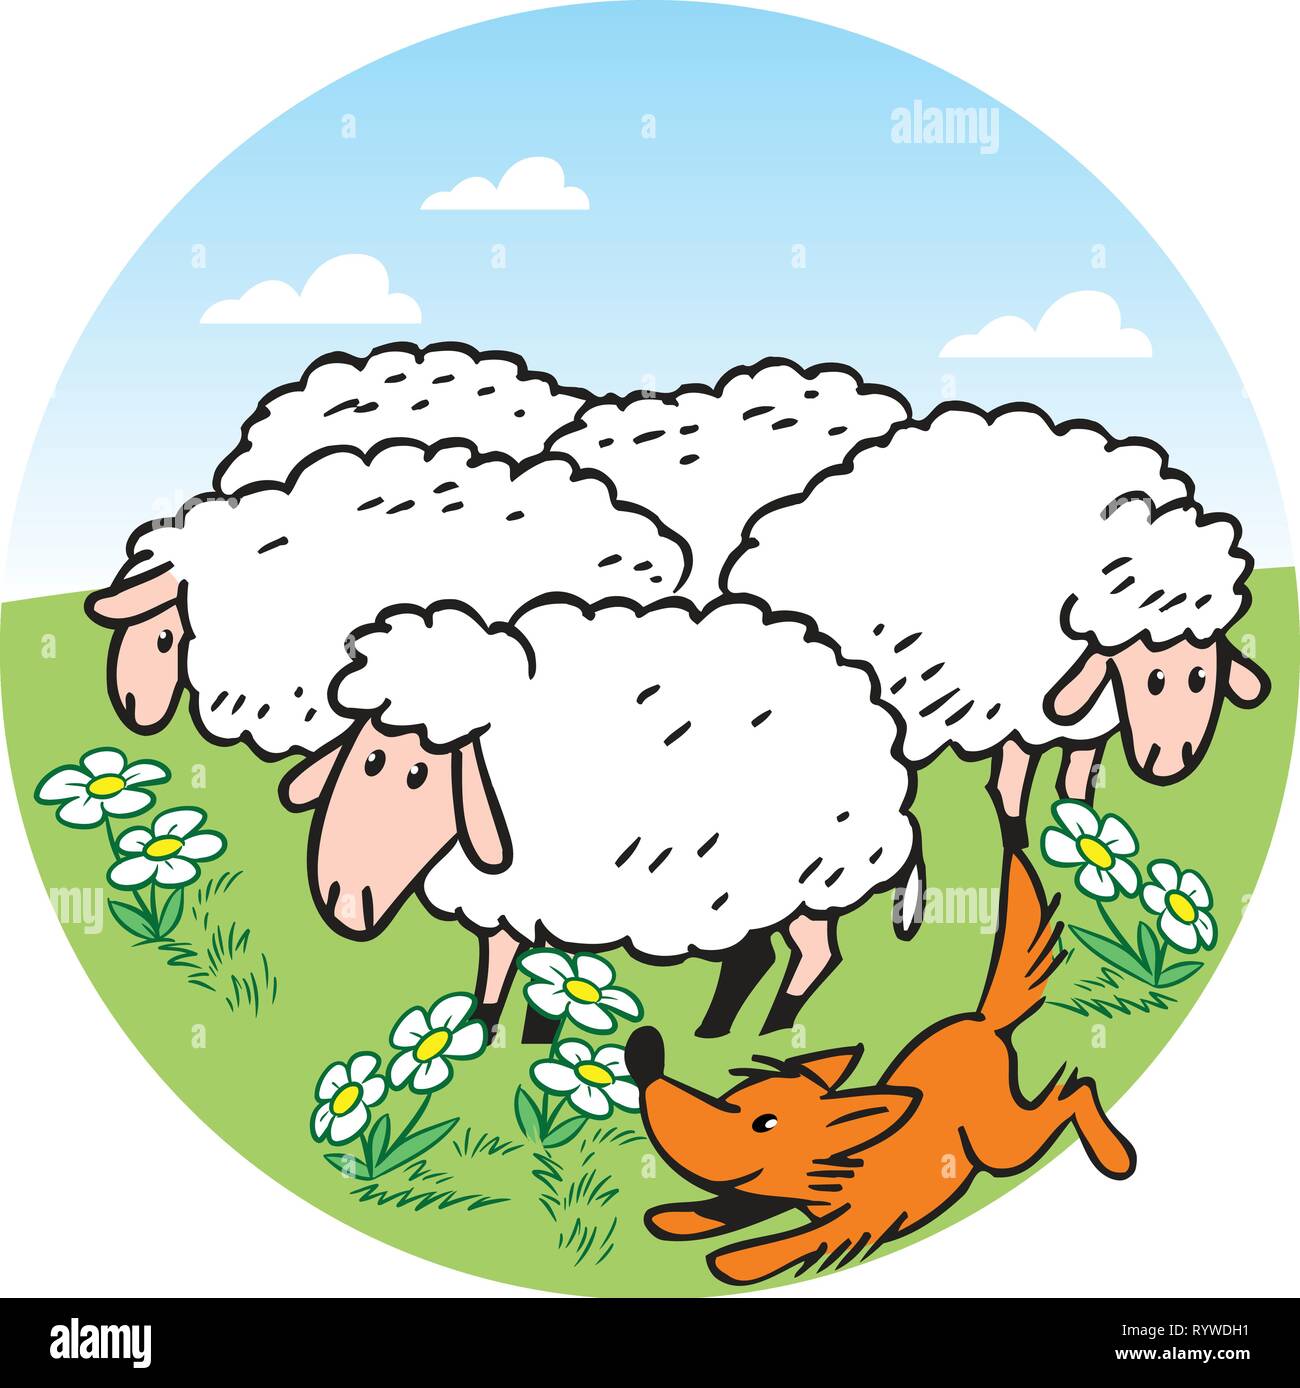 The illustration shows a flock of sheep that graze on a green meadow. Shepherd dog runs near the herd. Illustration done in cartoon style, on separate Stock Vector